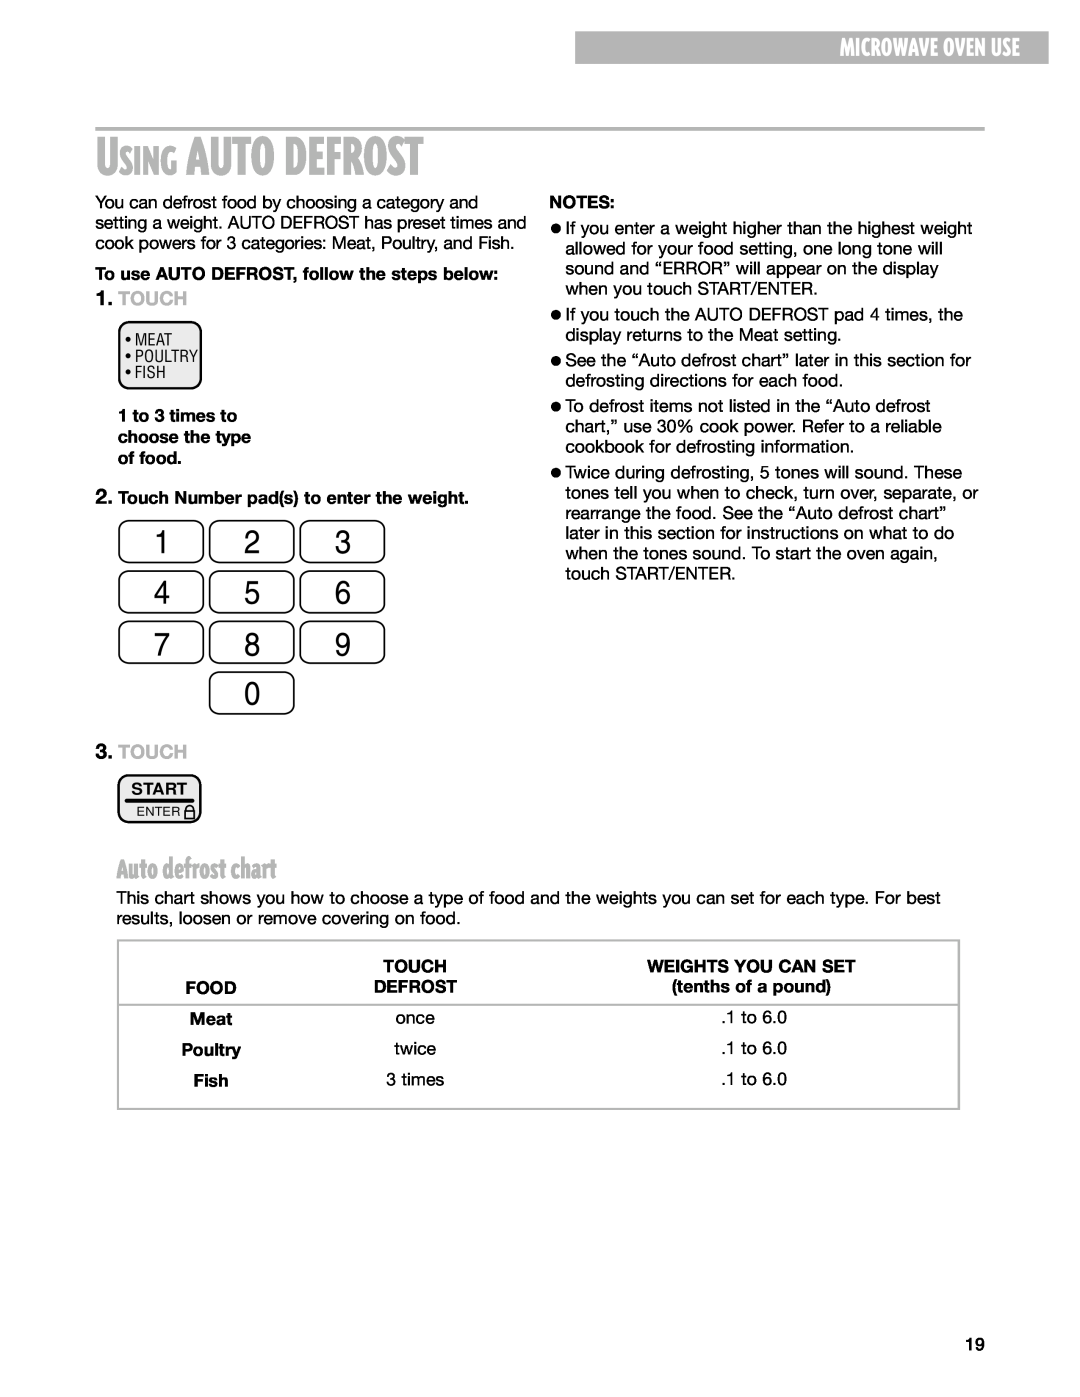 Whirlpool MT1111SK installation instructions Auto defrost chart, Microwave Oven Use, Touch, Using Auto Defrost 